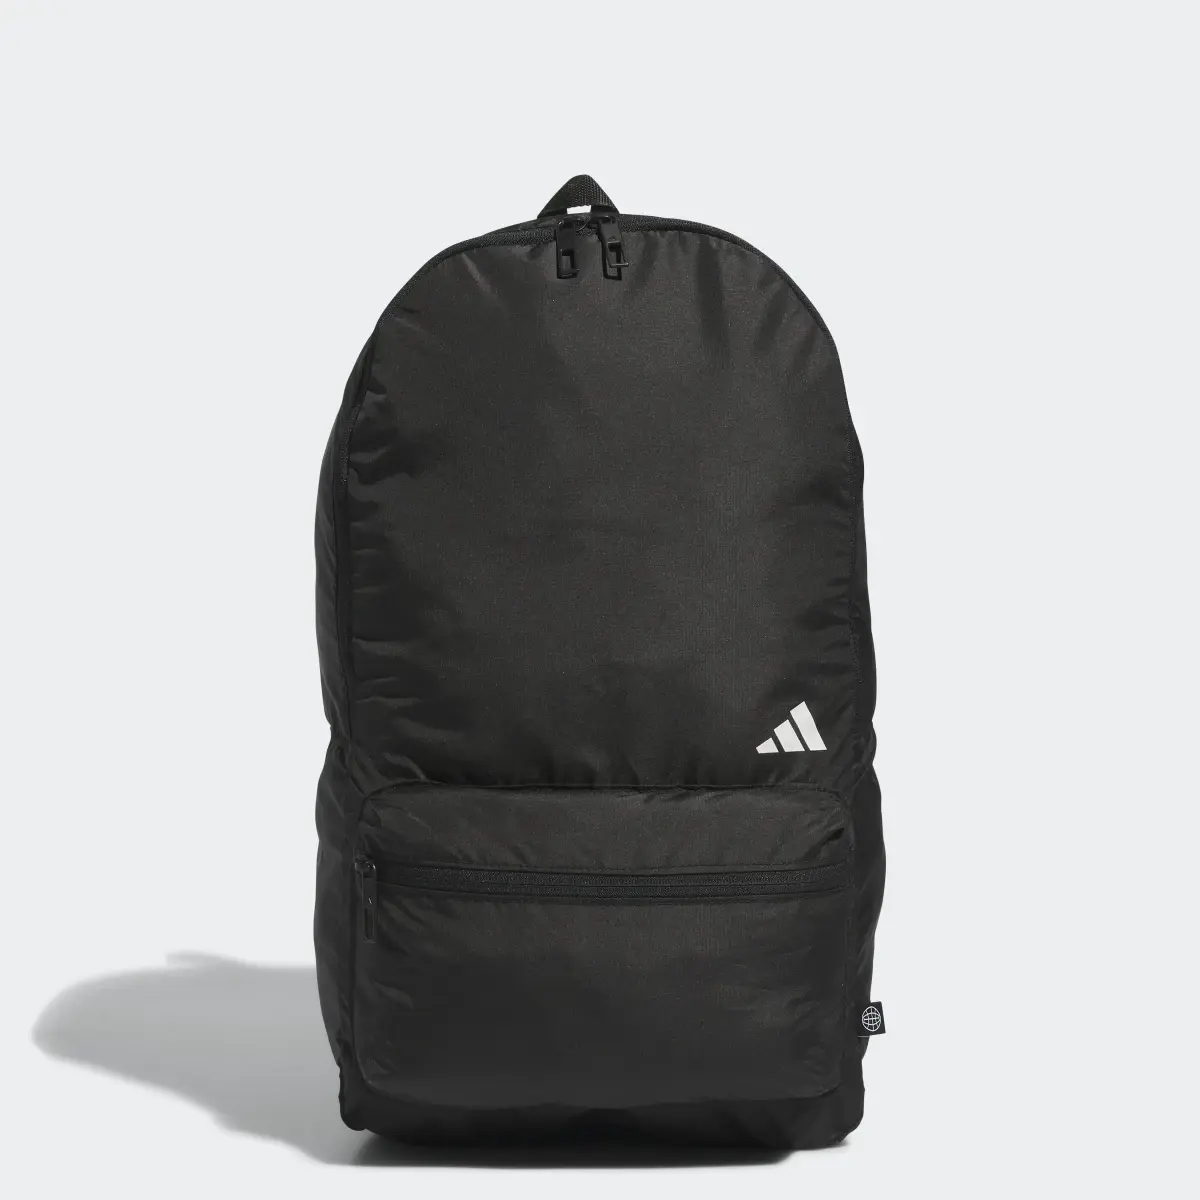 Adidas Golf Packable Backpack. 1